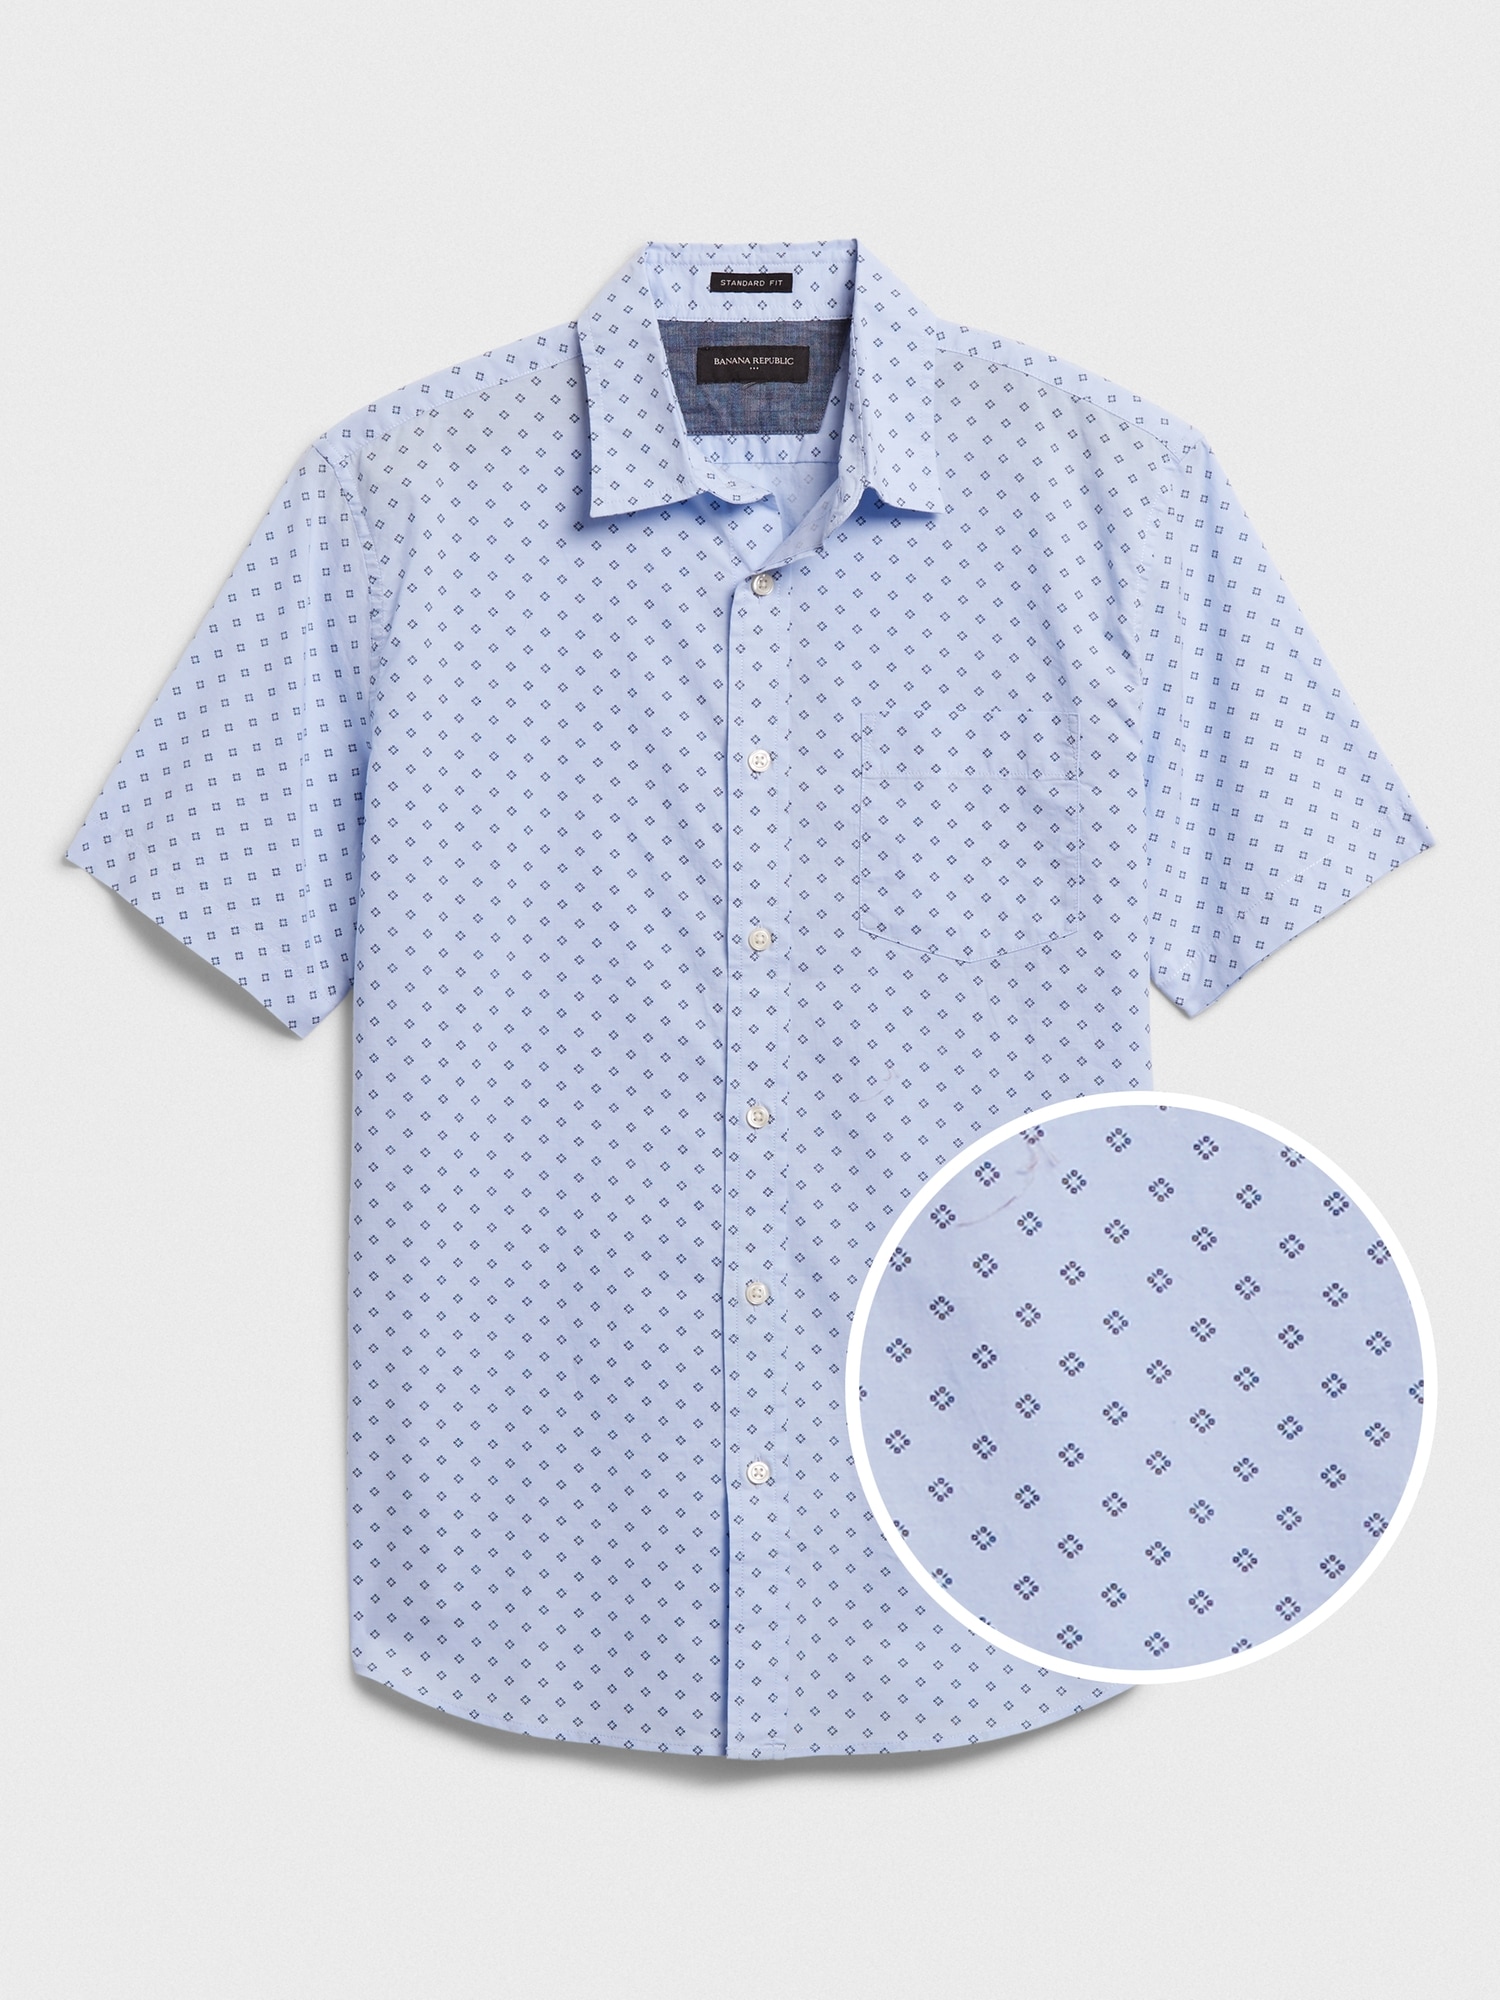 Made with Organically Grown Cotton Shirt